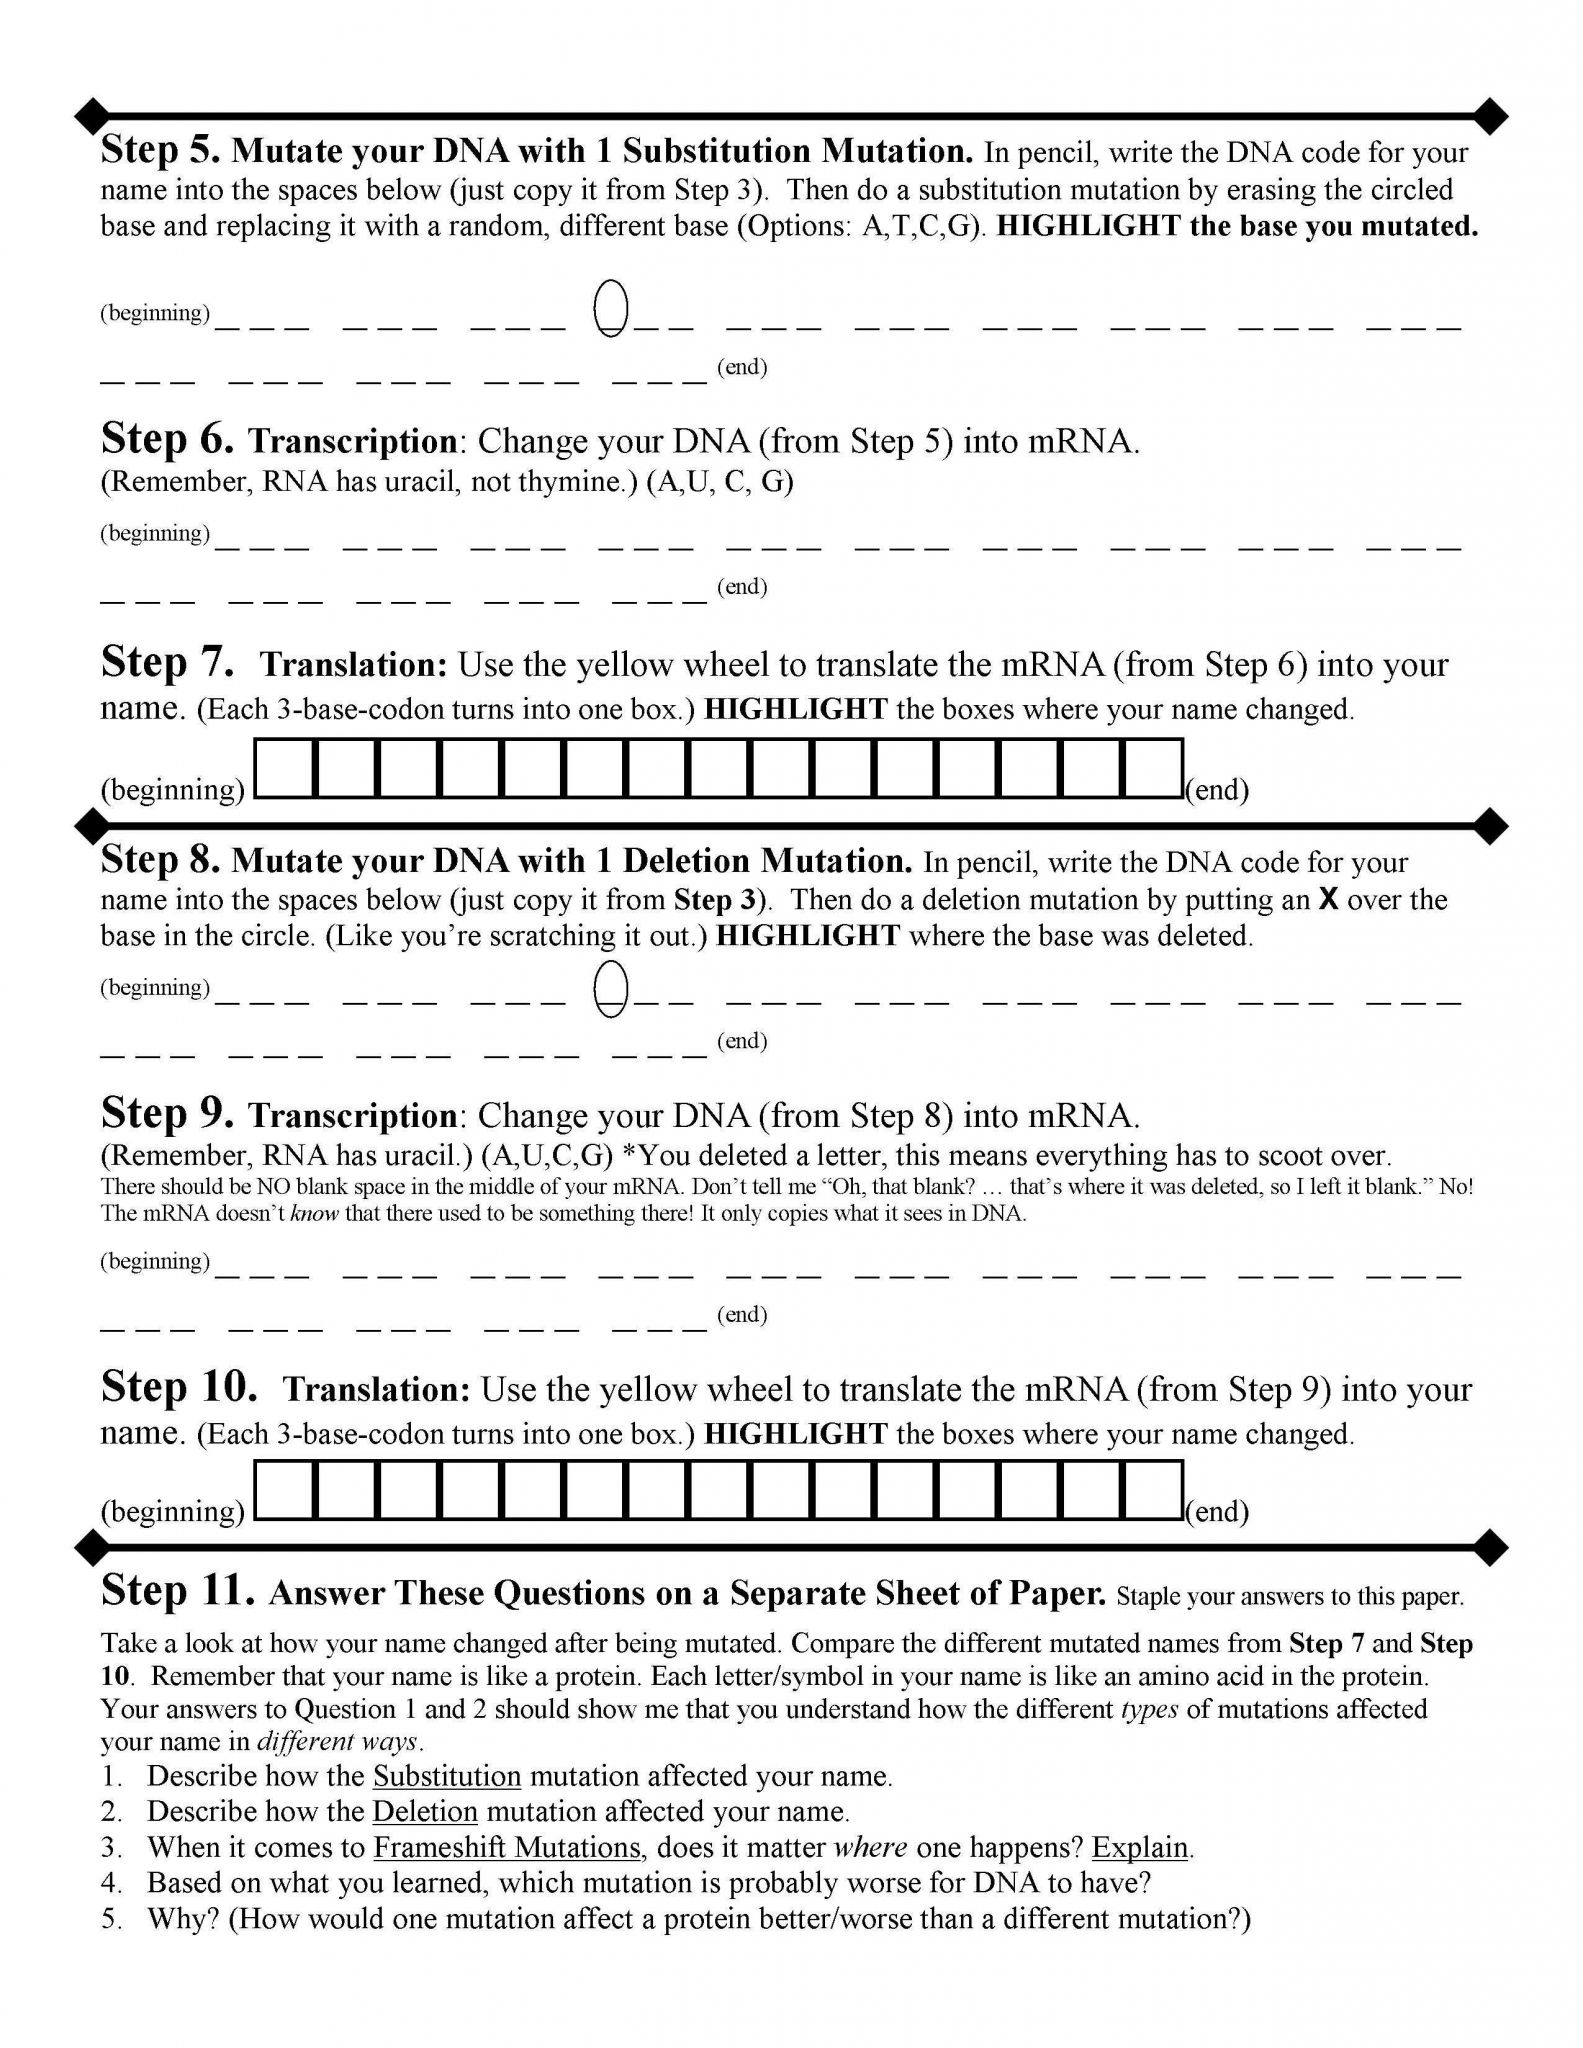 Transcription Worksheet Answer Key together with Chapter 12 Dna and Rna Worksheet Answers